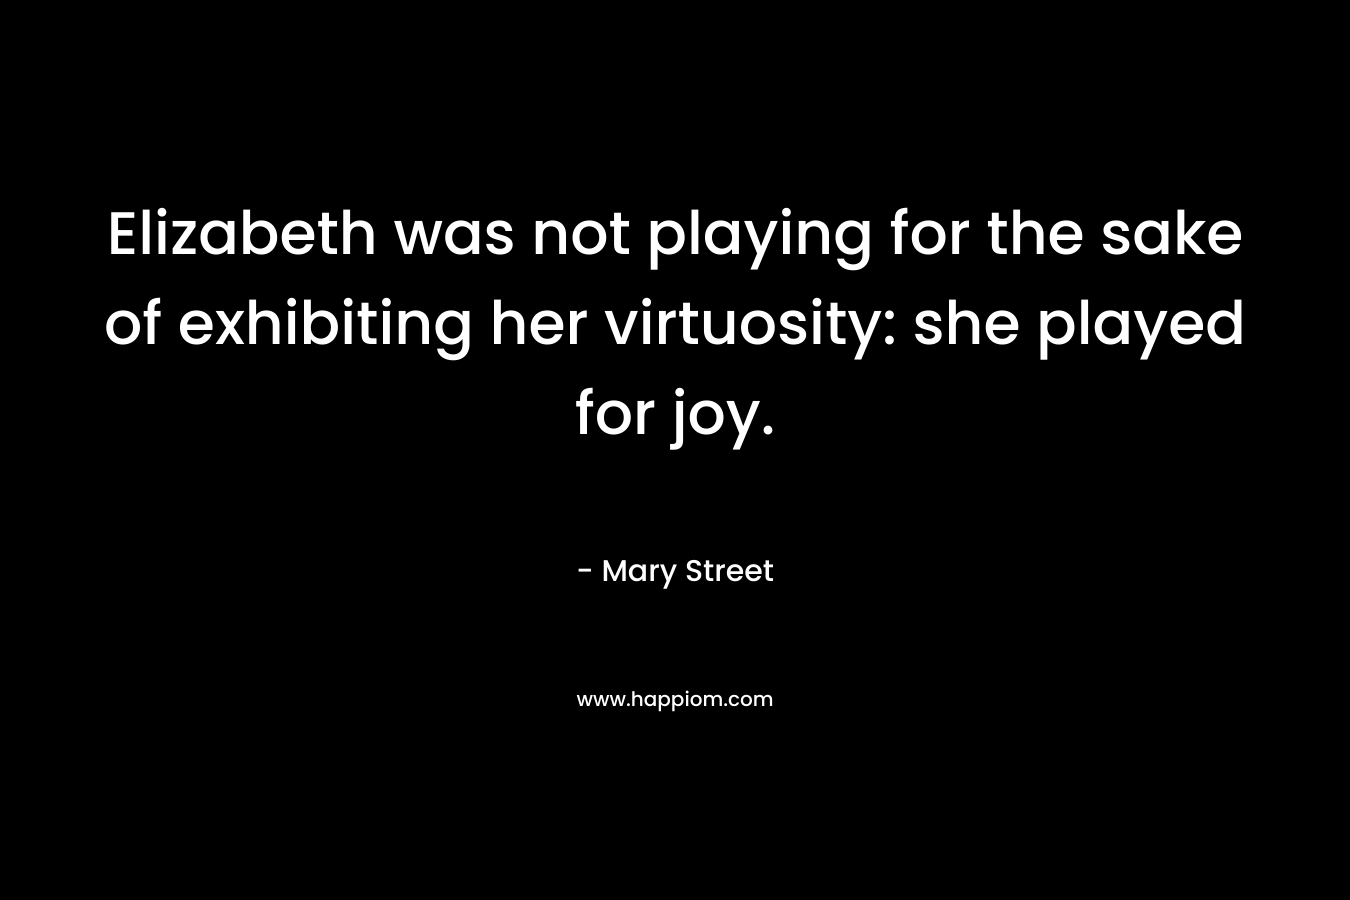 Elizabeth was not playing for the sake of exhibiting her virtuosity: she played for joy.